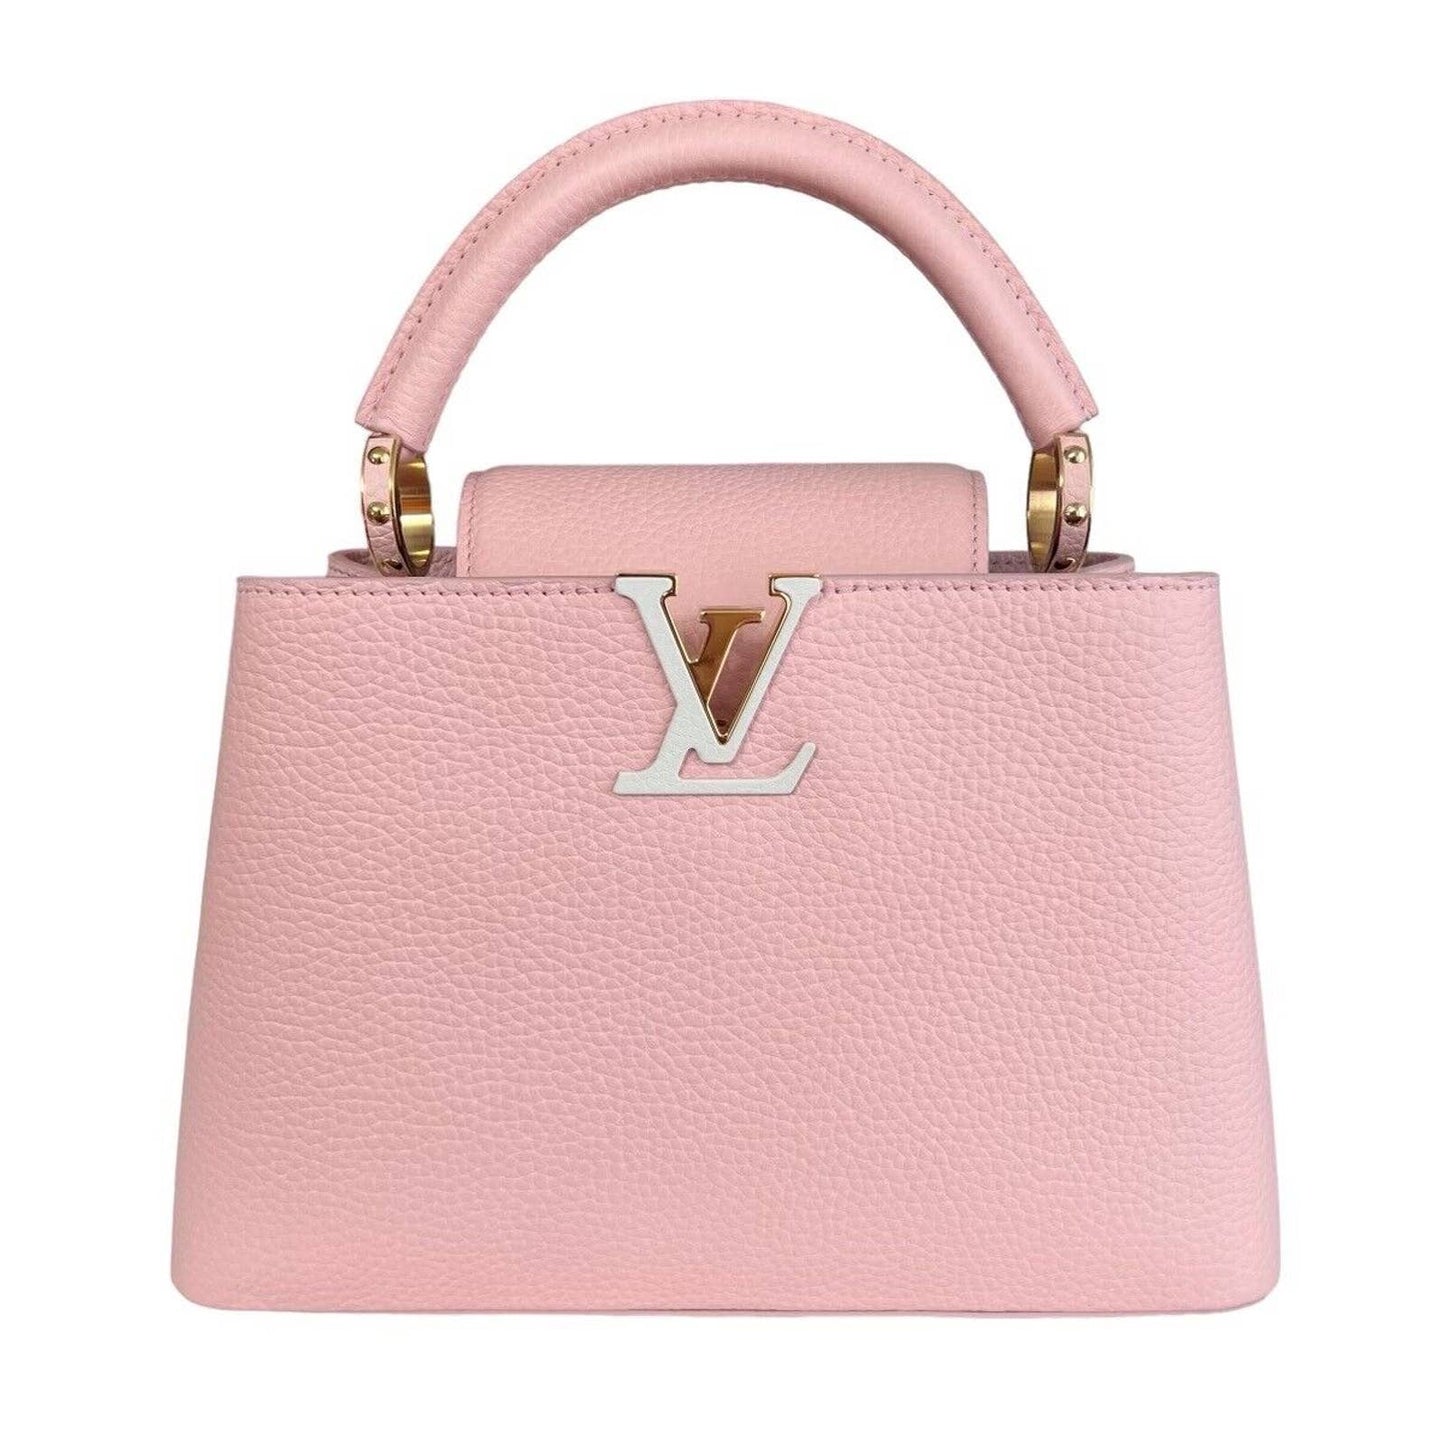 New Limited Edition Louis VUITTON Capucines pm Pink Leather Hand Shoulder Bag